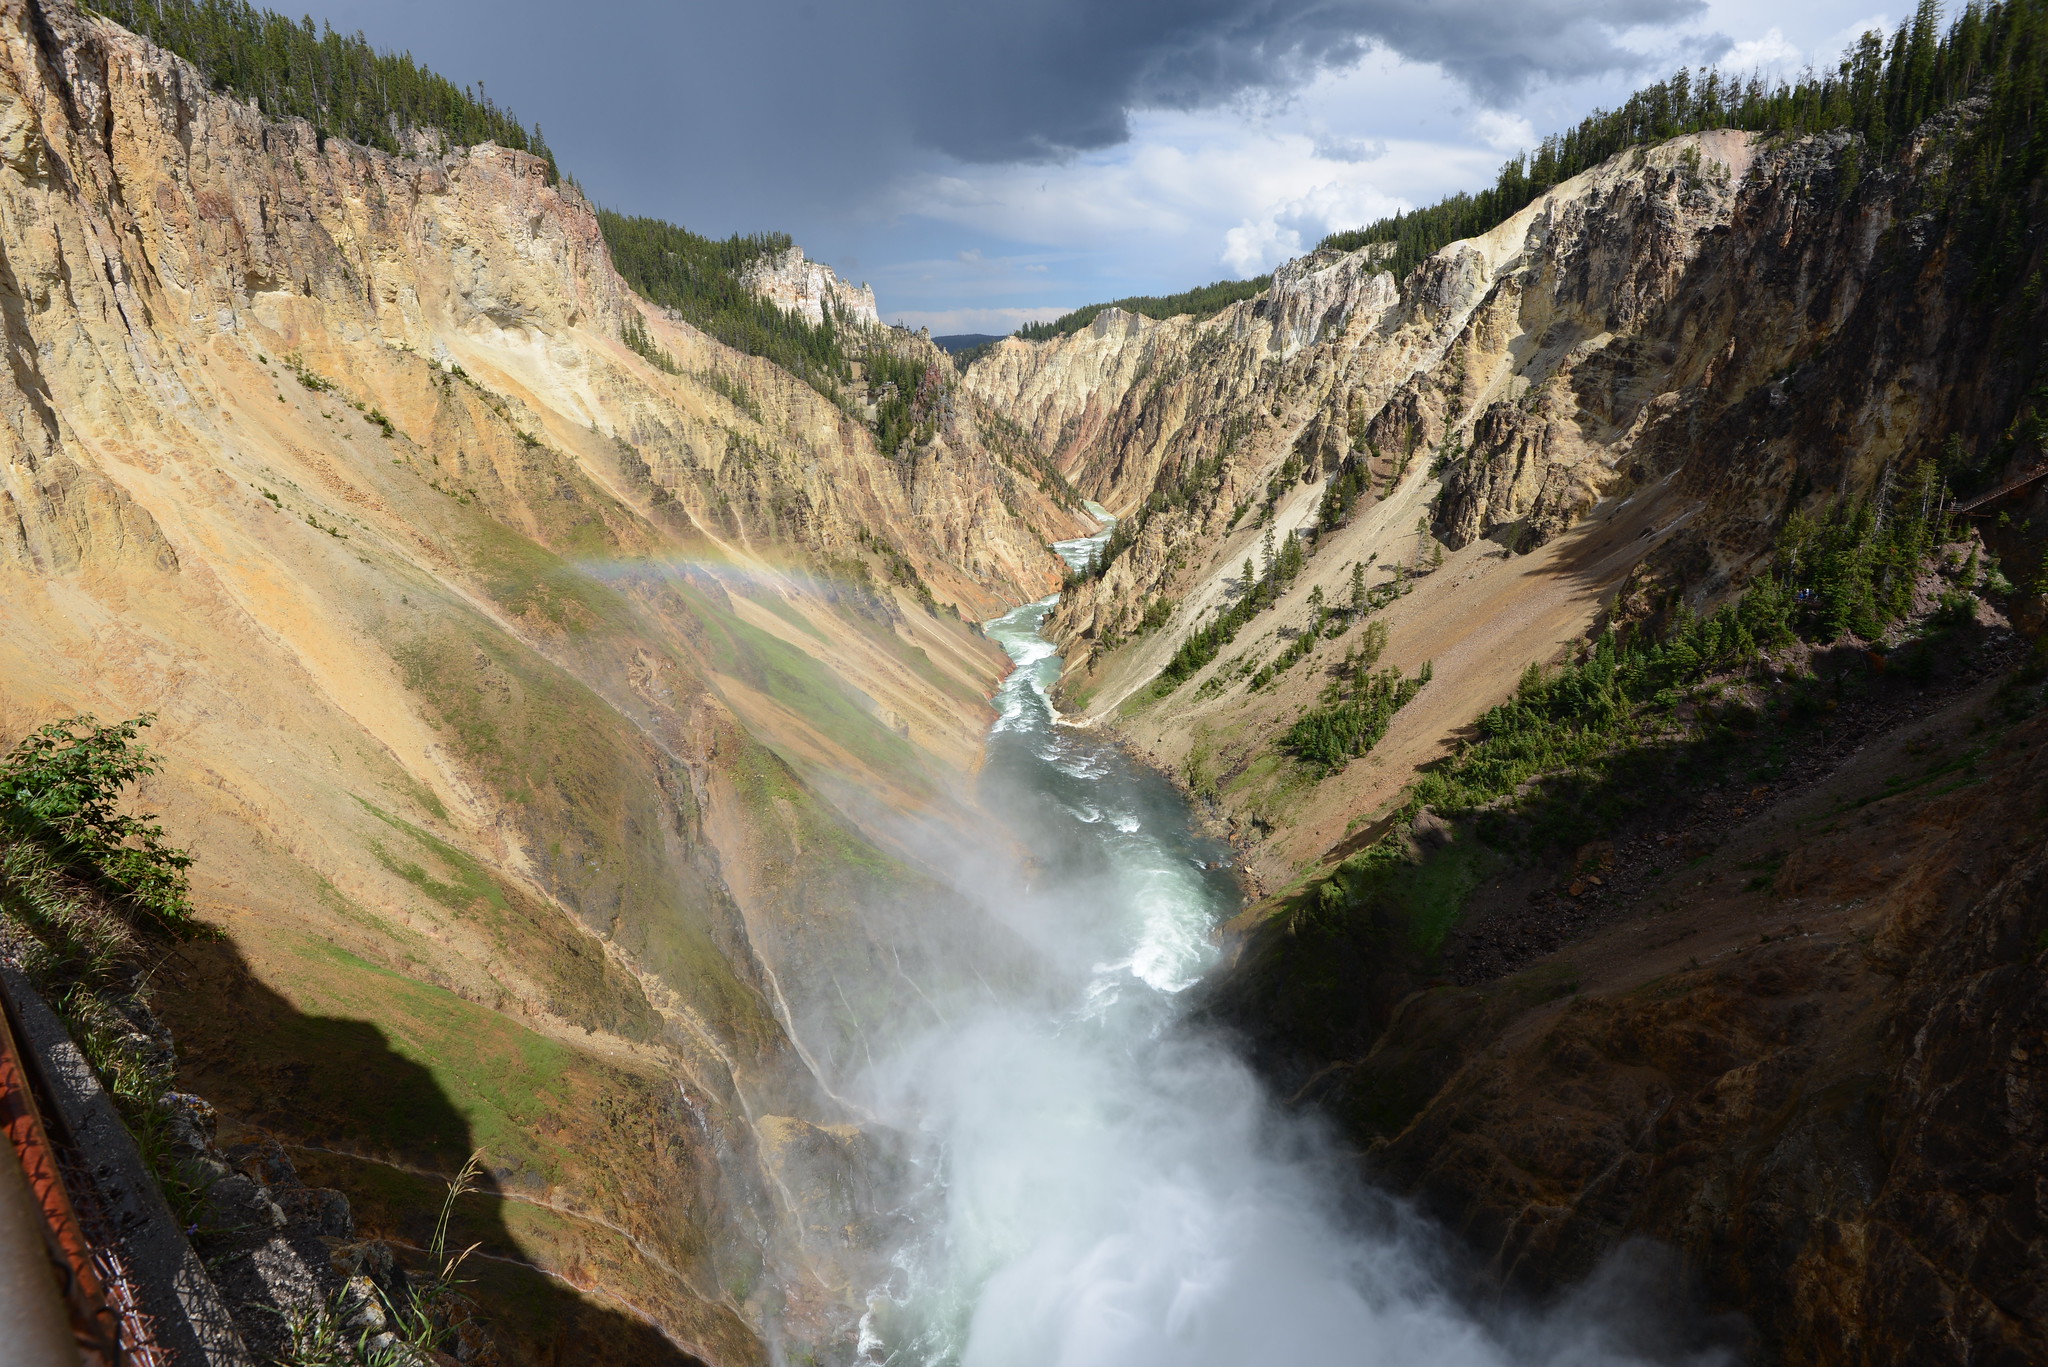 A mighty view in Yellowstone National Park